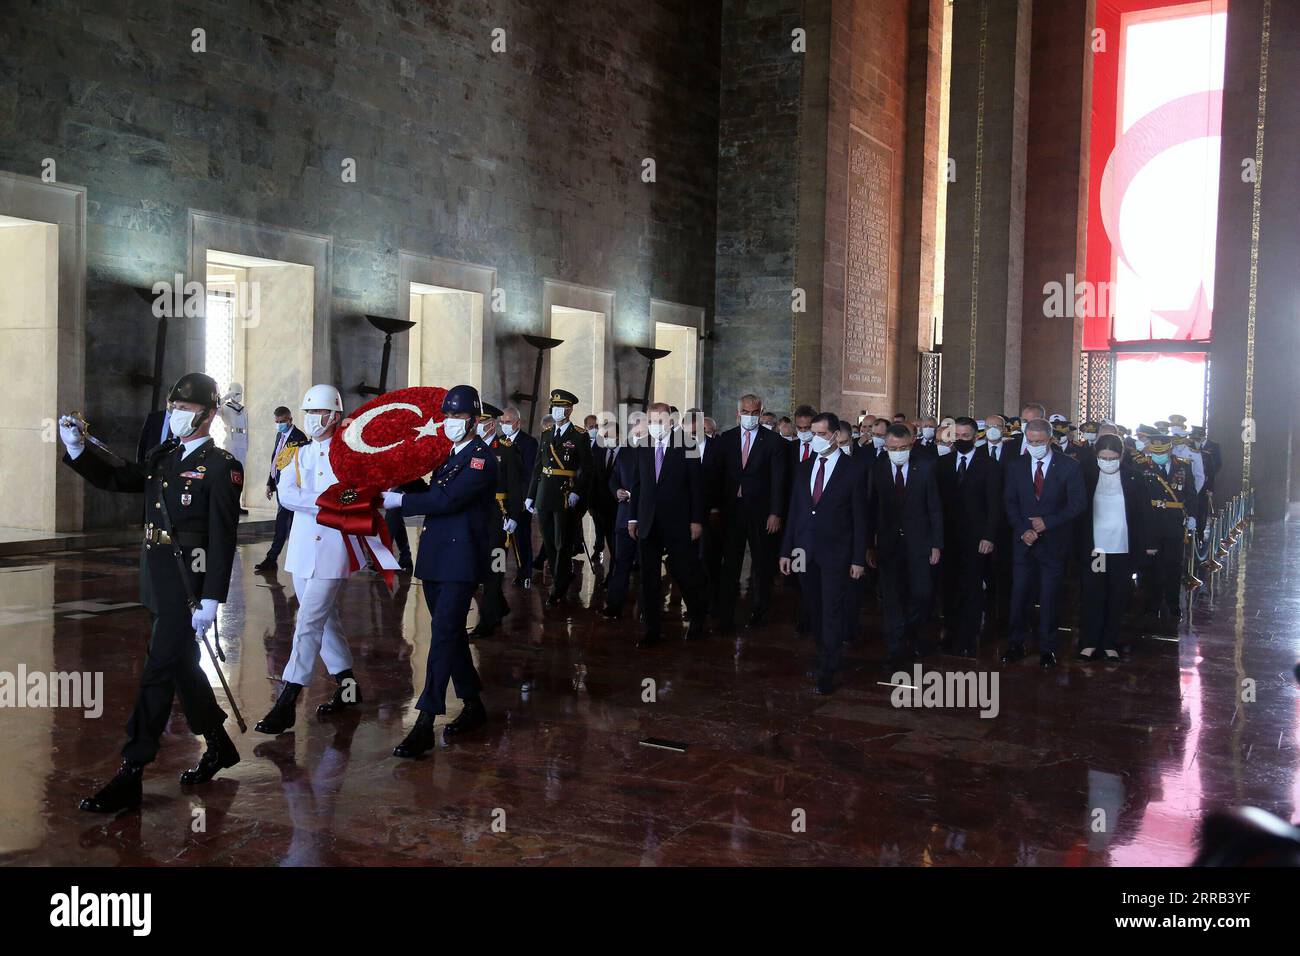 210831 -- ANKARA, Aug. 31, 2021 -- Turkish President Tayyip Erdogan attends a ceremony marking the 99th anniversary of Victory Day at the Ataturk Mausoleum in Ankara, Turkey, on Aug. 30, 2021. Turkey on Monday celebrated the 99th anniversary of Victory Day, the day the Turks defeated the Greek forces at the Battle of Dumlupinar, the final battle of the Turkish War of Independence in 1922. Photo by /Xinhua TURKEY-ANKARA-VICTORY DAY-ANNIVERSARY MustafaxKaya PUBLICATIONxNOTxINxCHN Stock Photo